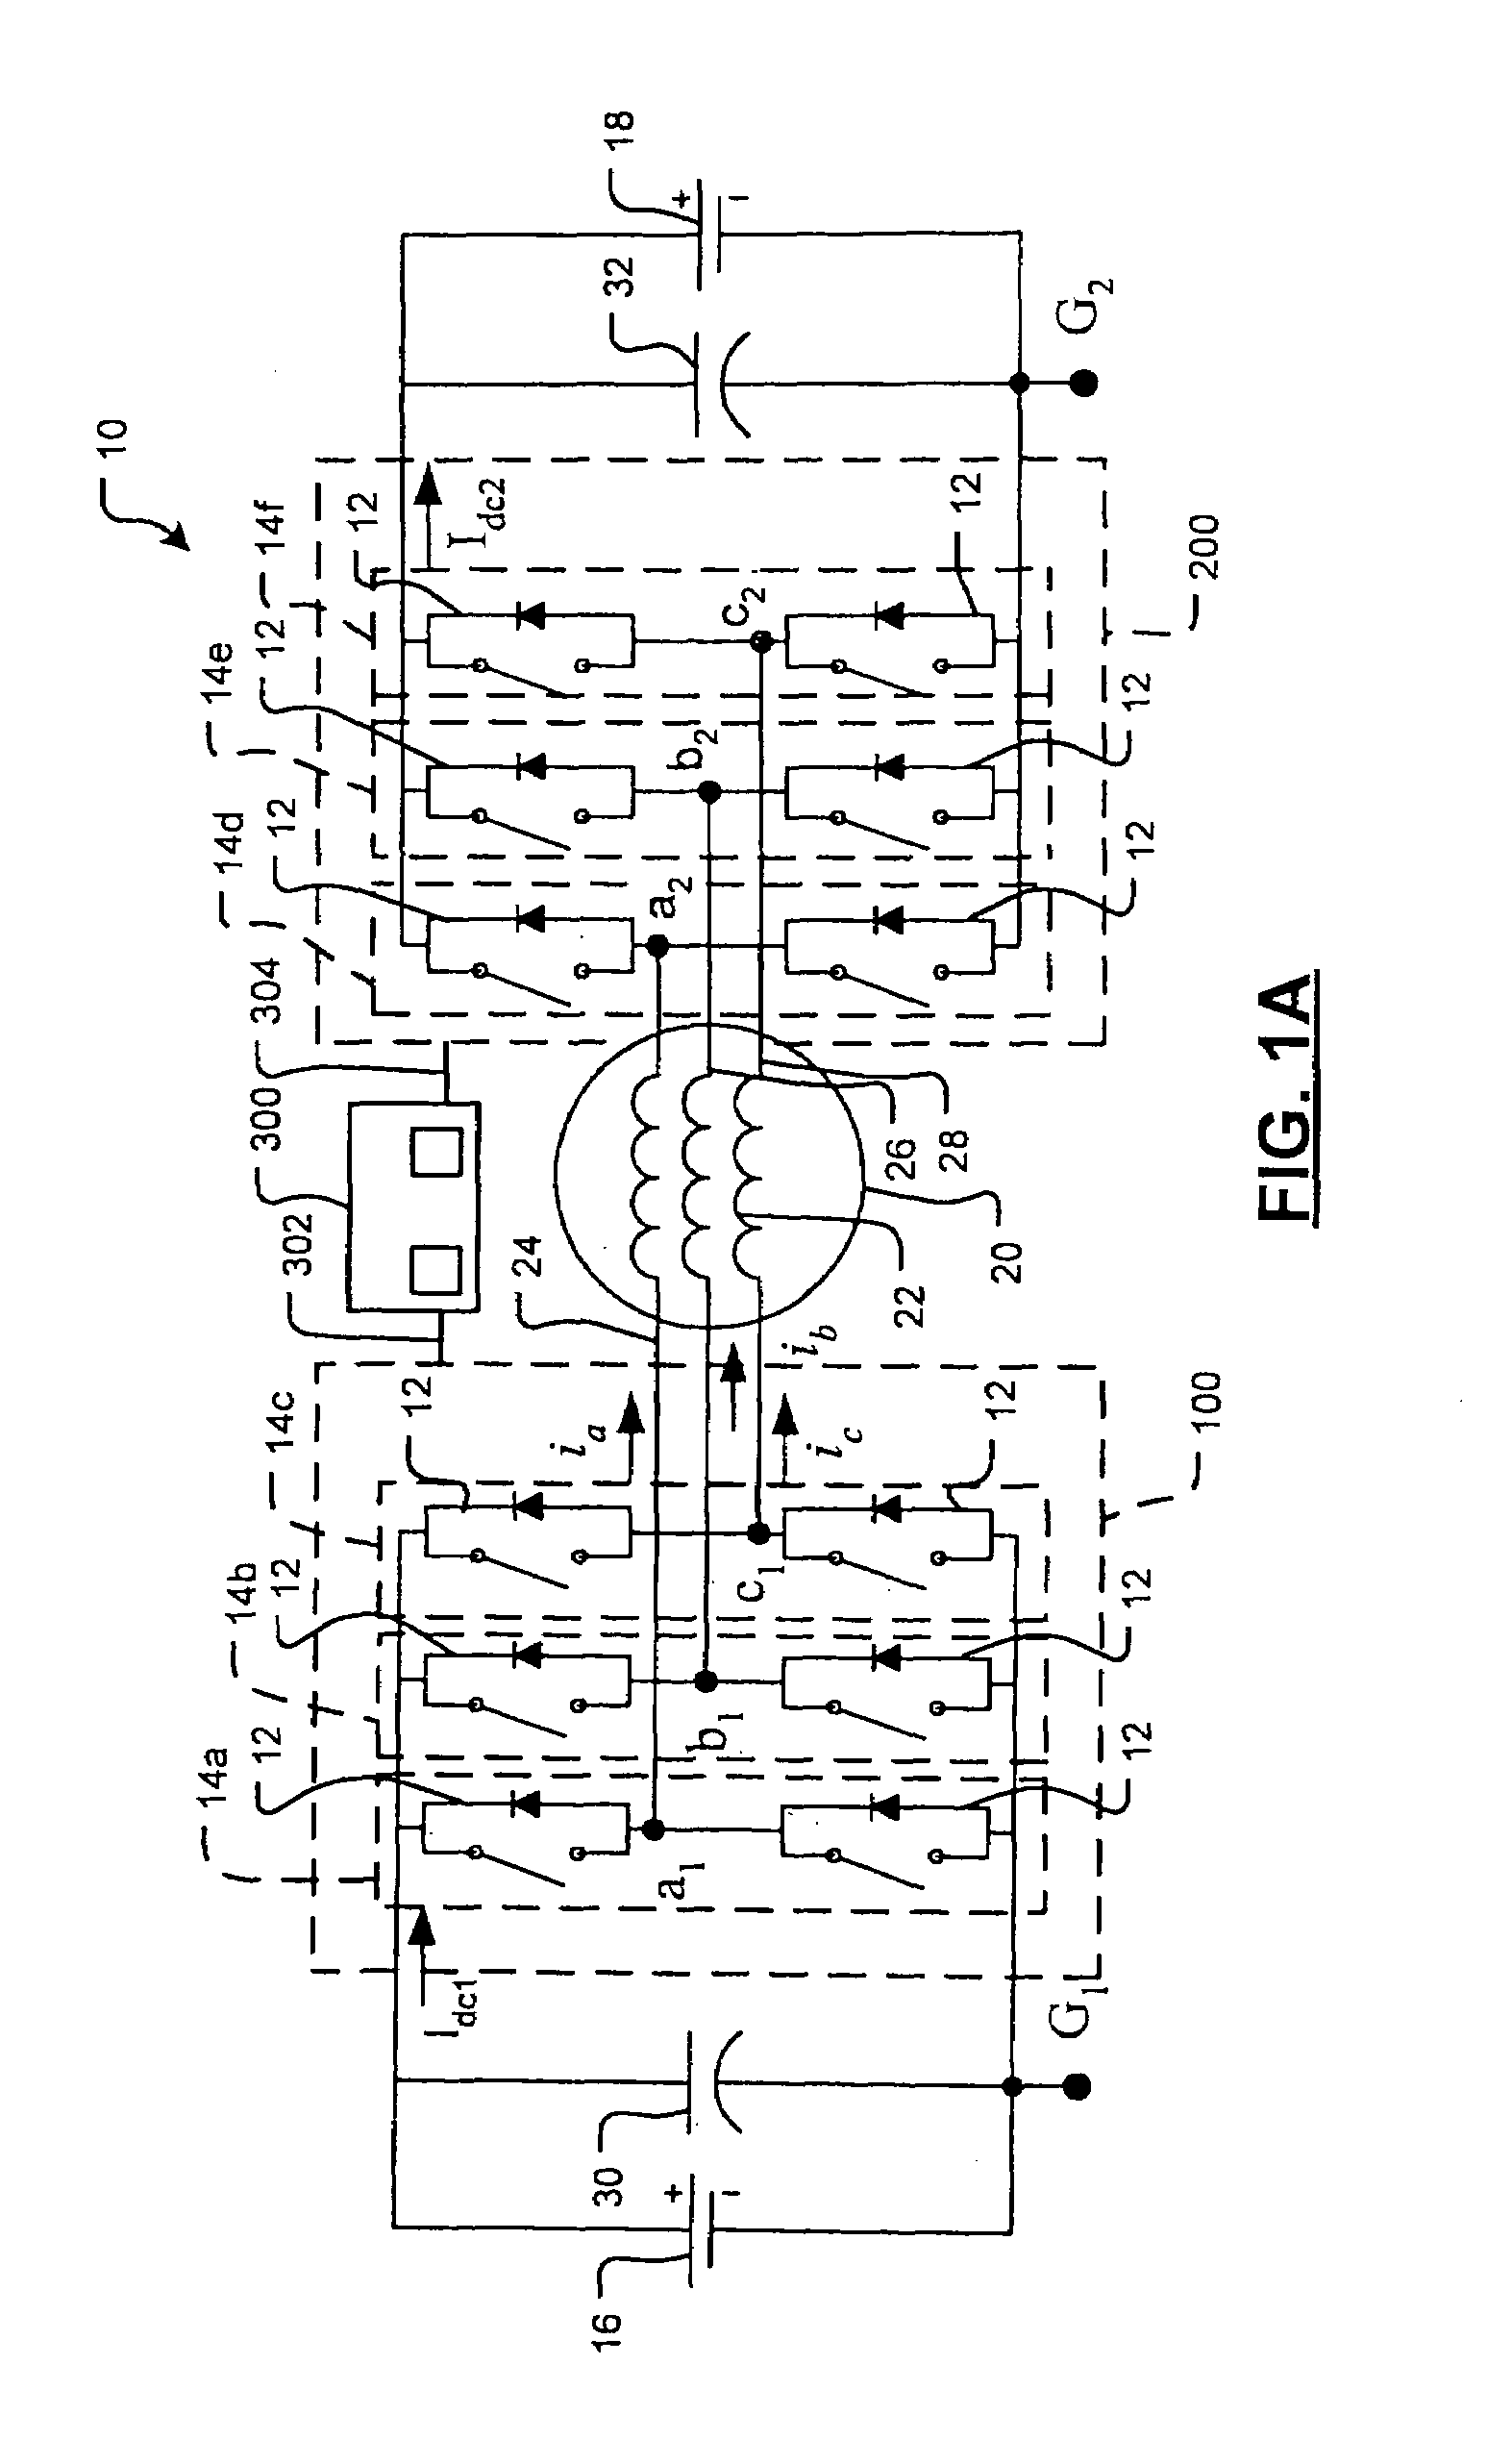 Unified power control method of double-ended inverter drive systems for hybrid vehicles